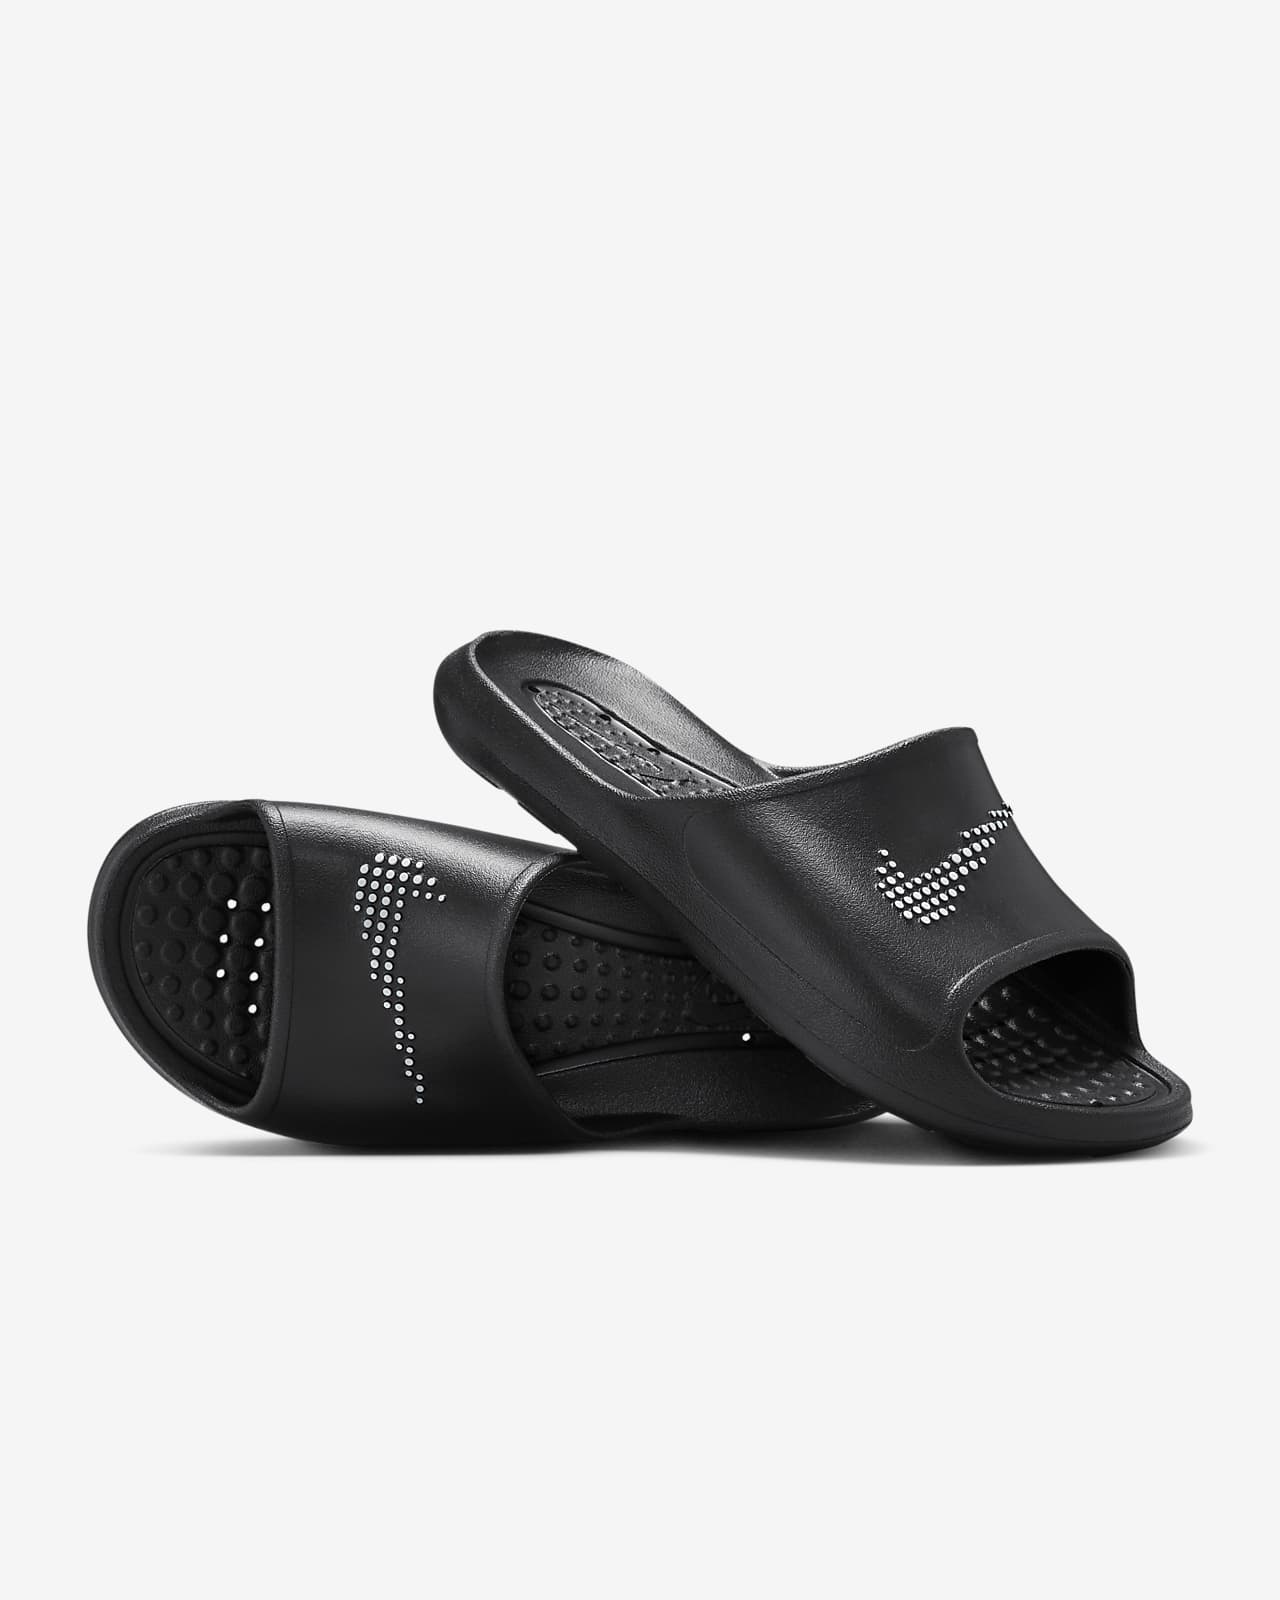 The 5 Best Flip Flops for Men | Tested by GearLab